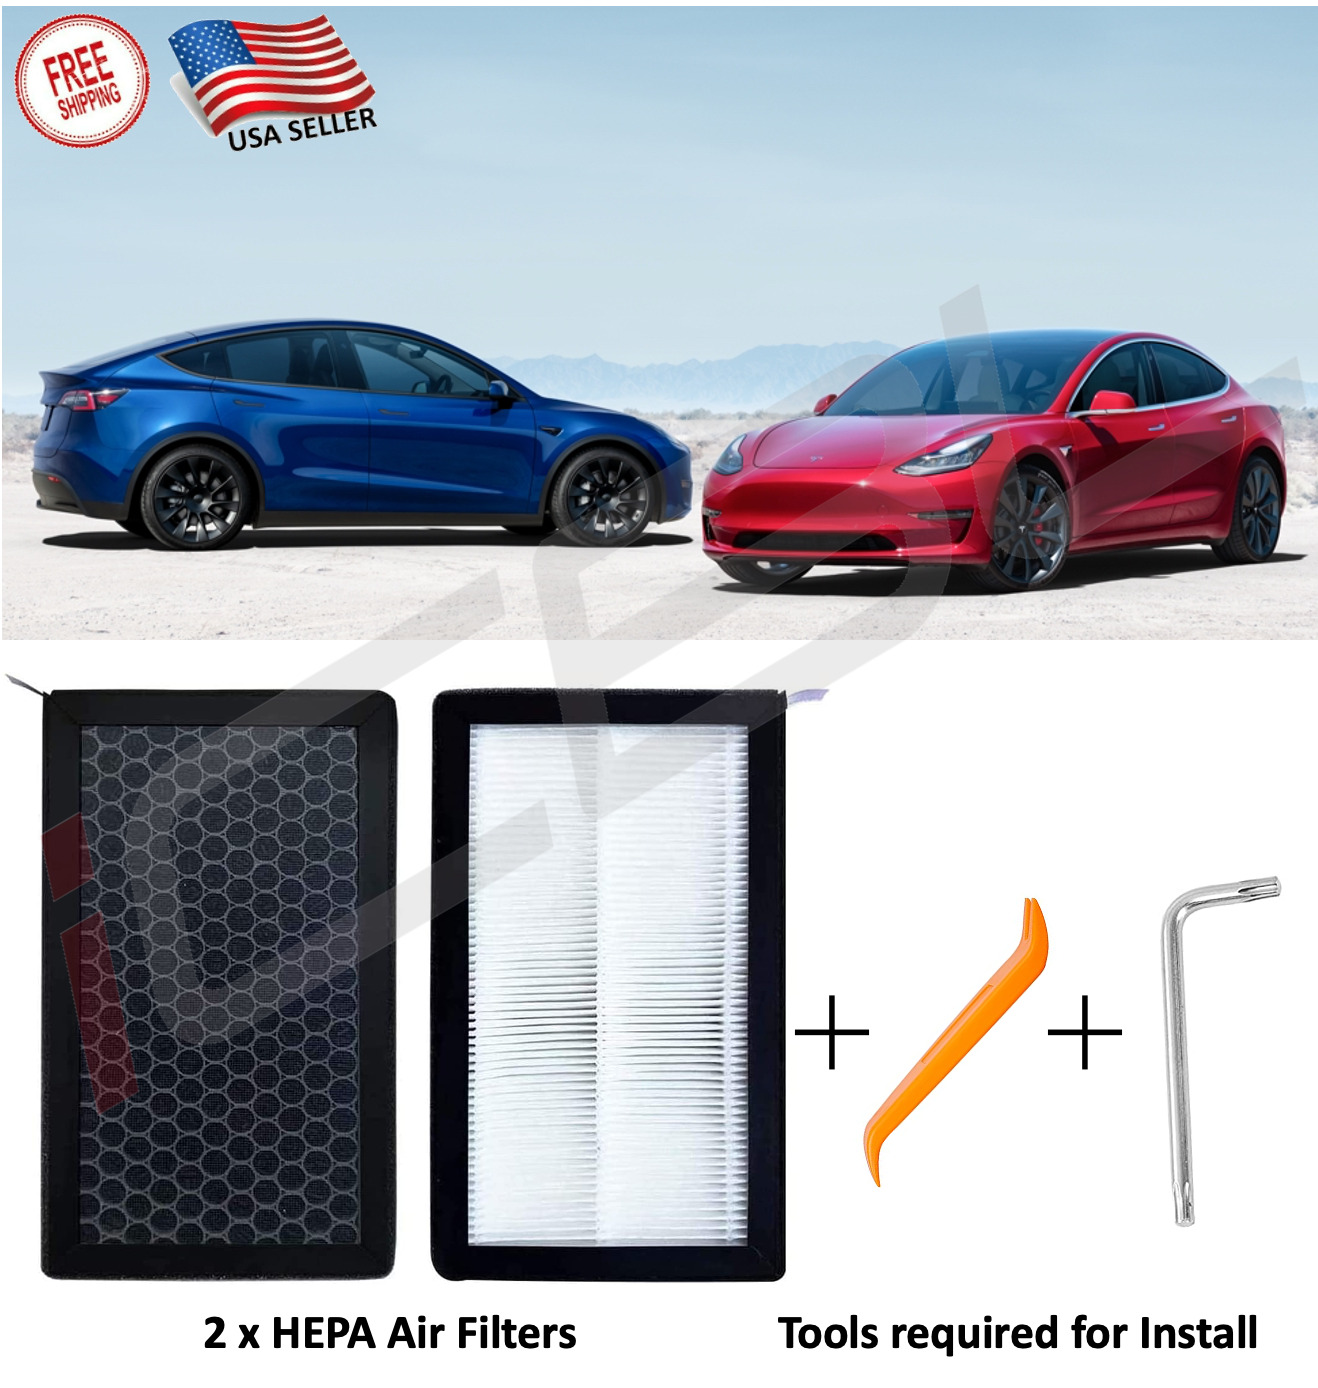 iCBL Cabin Air Filter for Tesla Model 3 and Model Y Set of 2 Pcs HEPA 2016 +